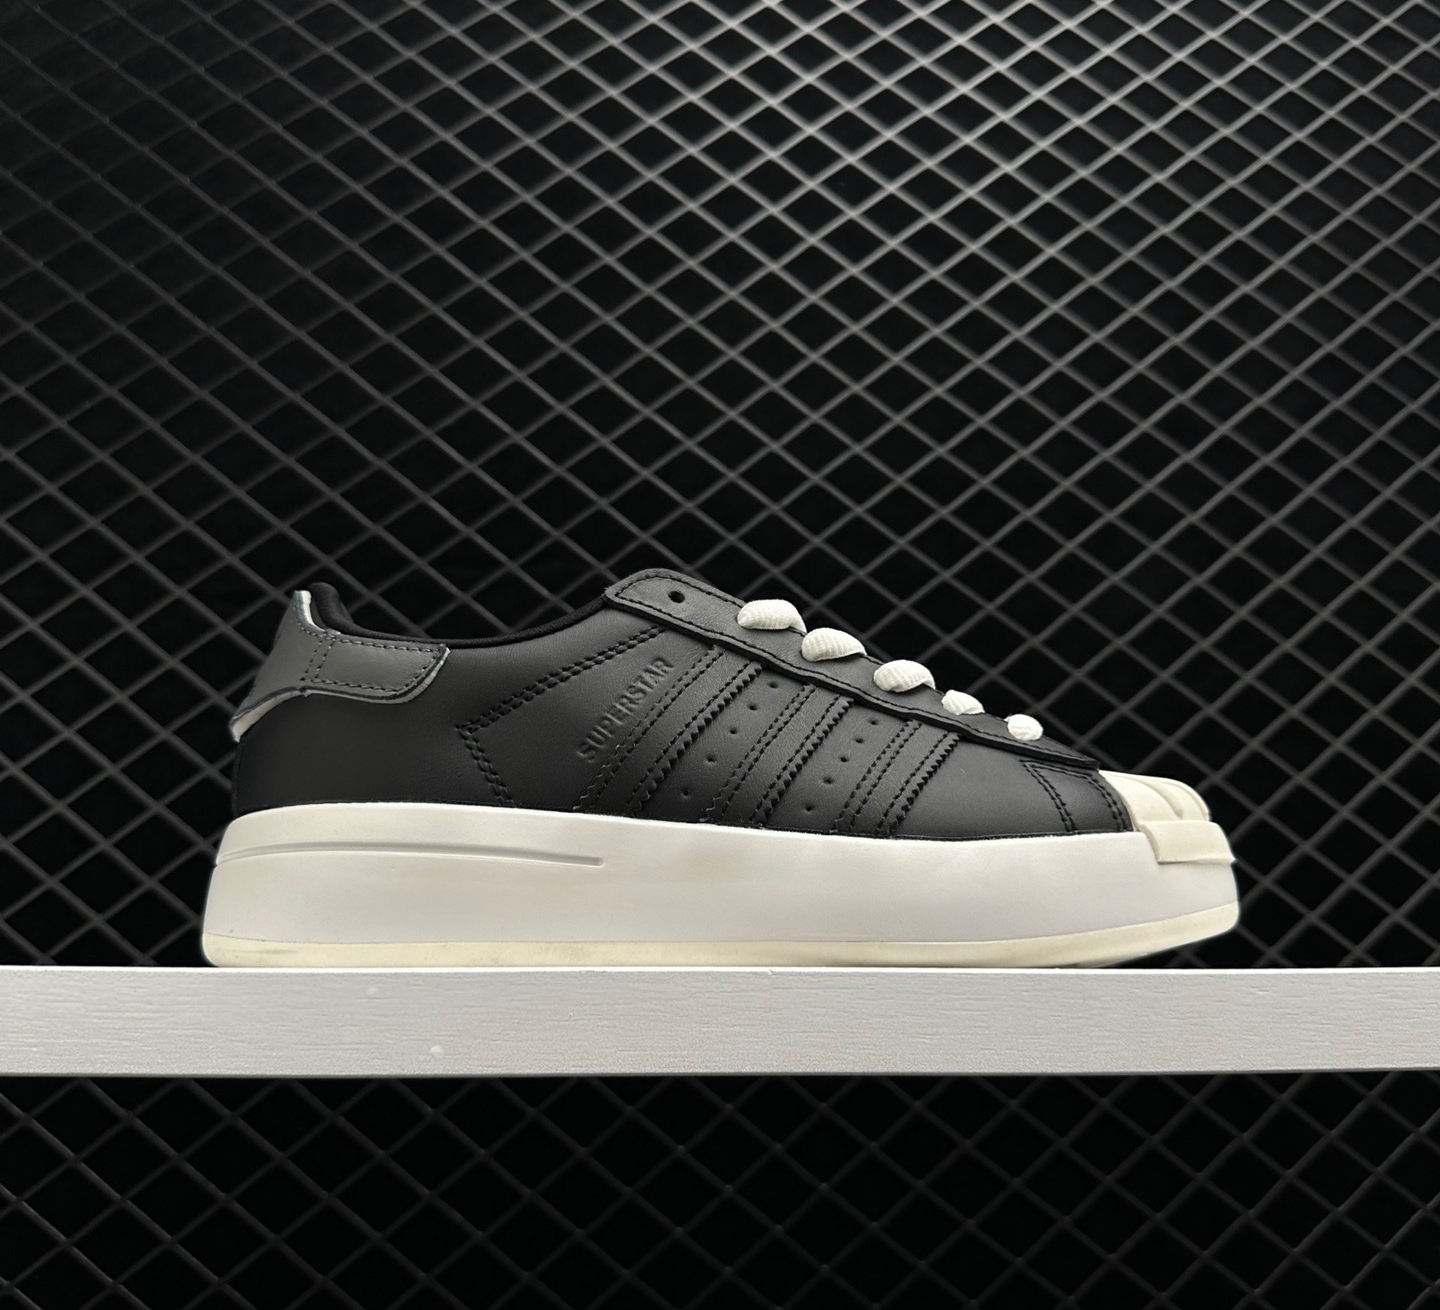 Adidas Originals Superstar Black White IG4803 - Classic Style for Modern Looks